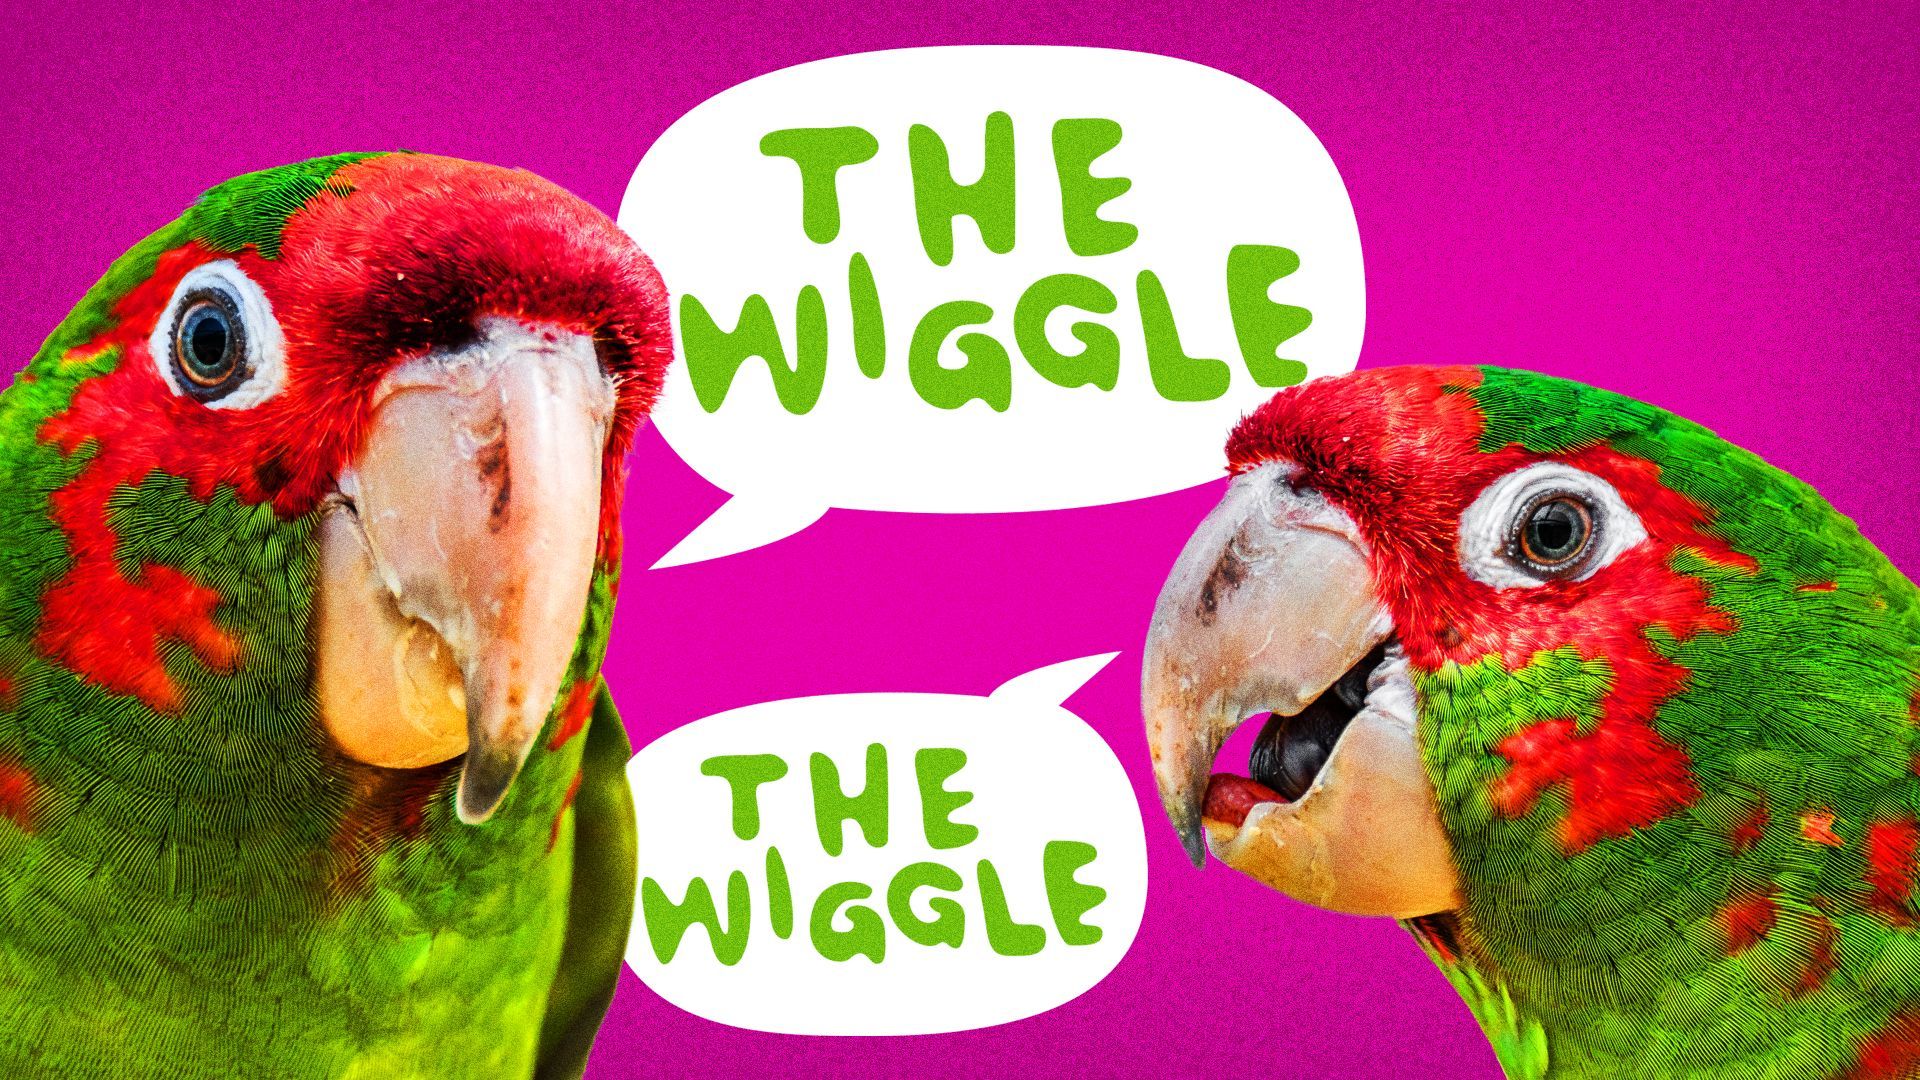 Illustration of two parrots repeating "The Wiggle."